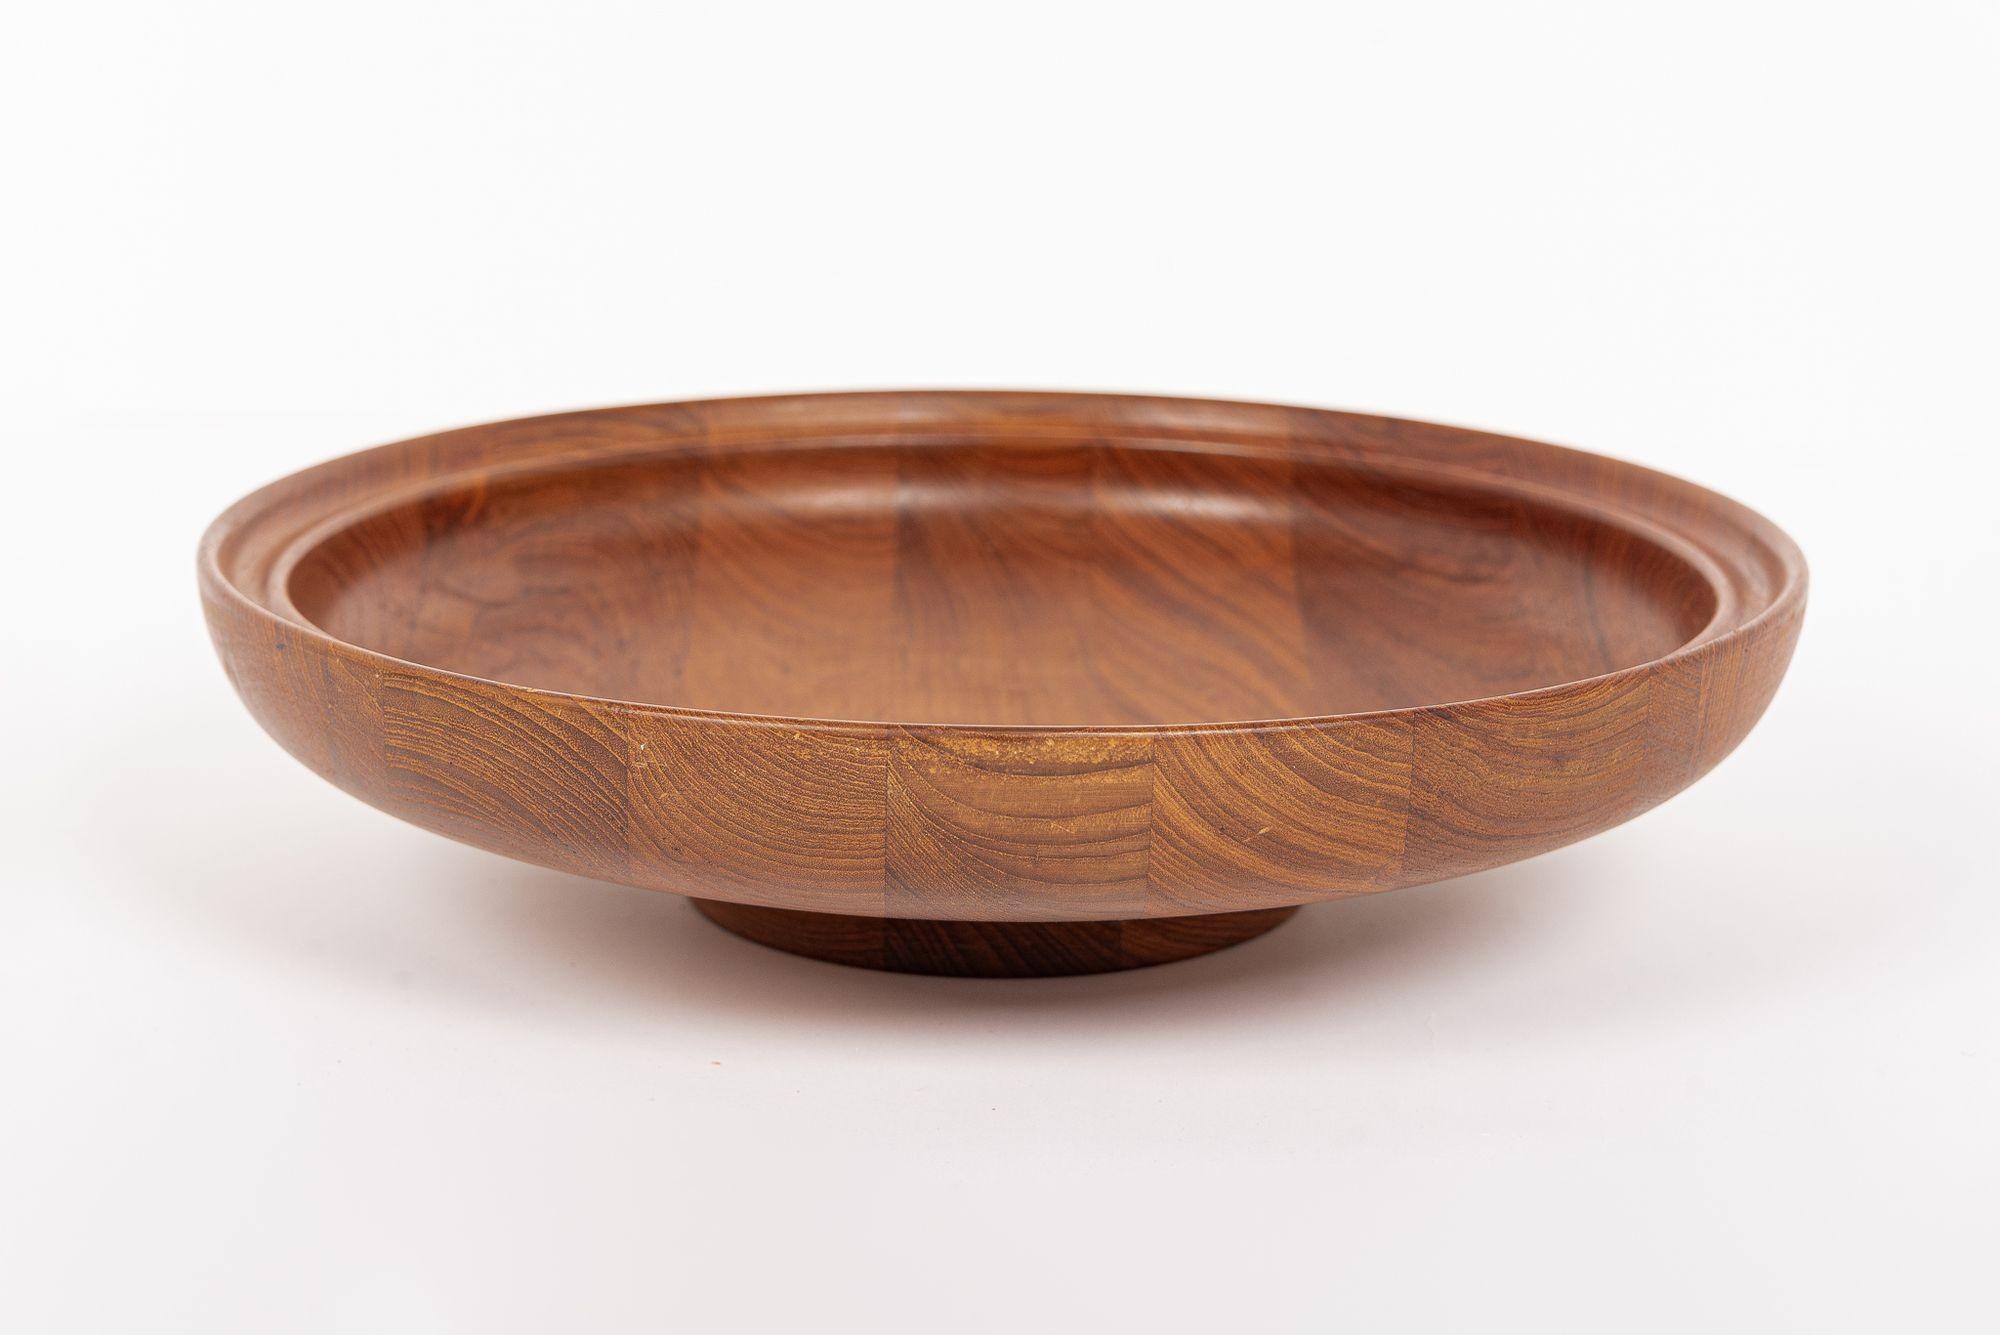 This rare and iconic vintage mid century Danish modern teak wood bowl was designed by Henning Koppel and produced by Georg Jensen and made in Denmark circa 1960. This large decorative bowl has a classic Scandinavian modern aesthetic with clean,